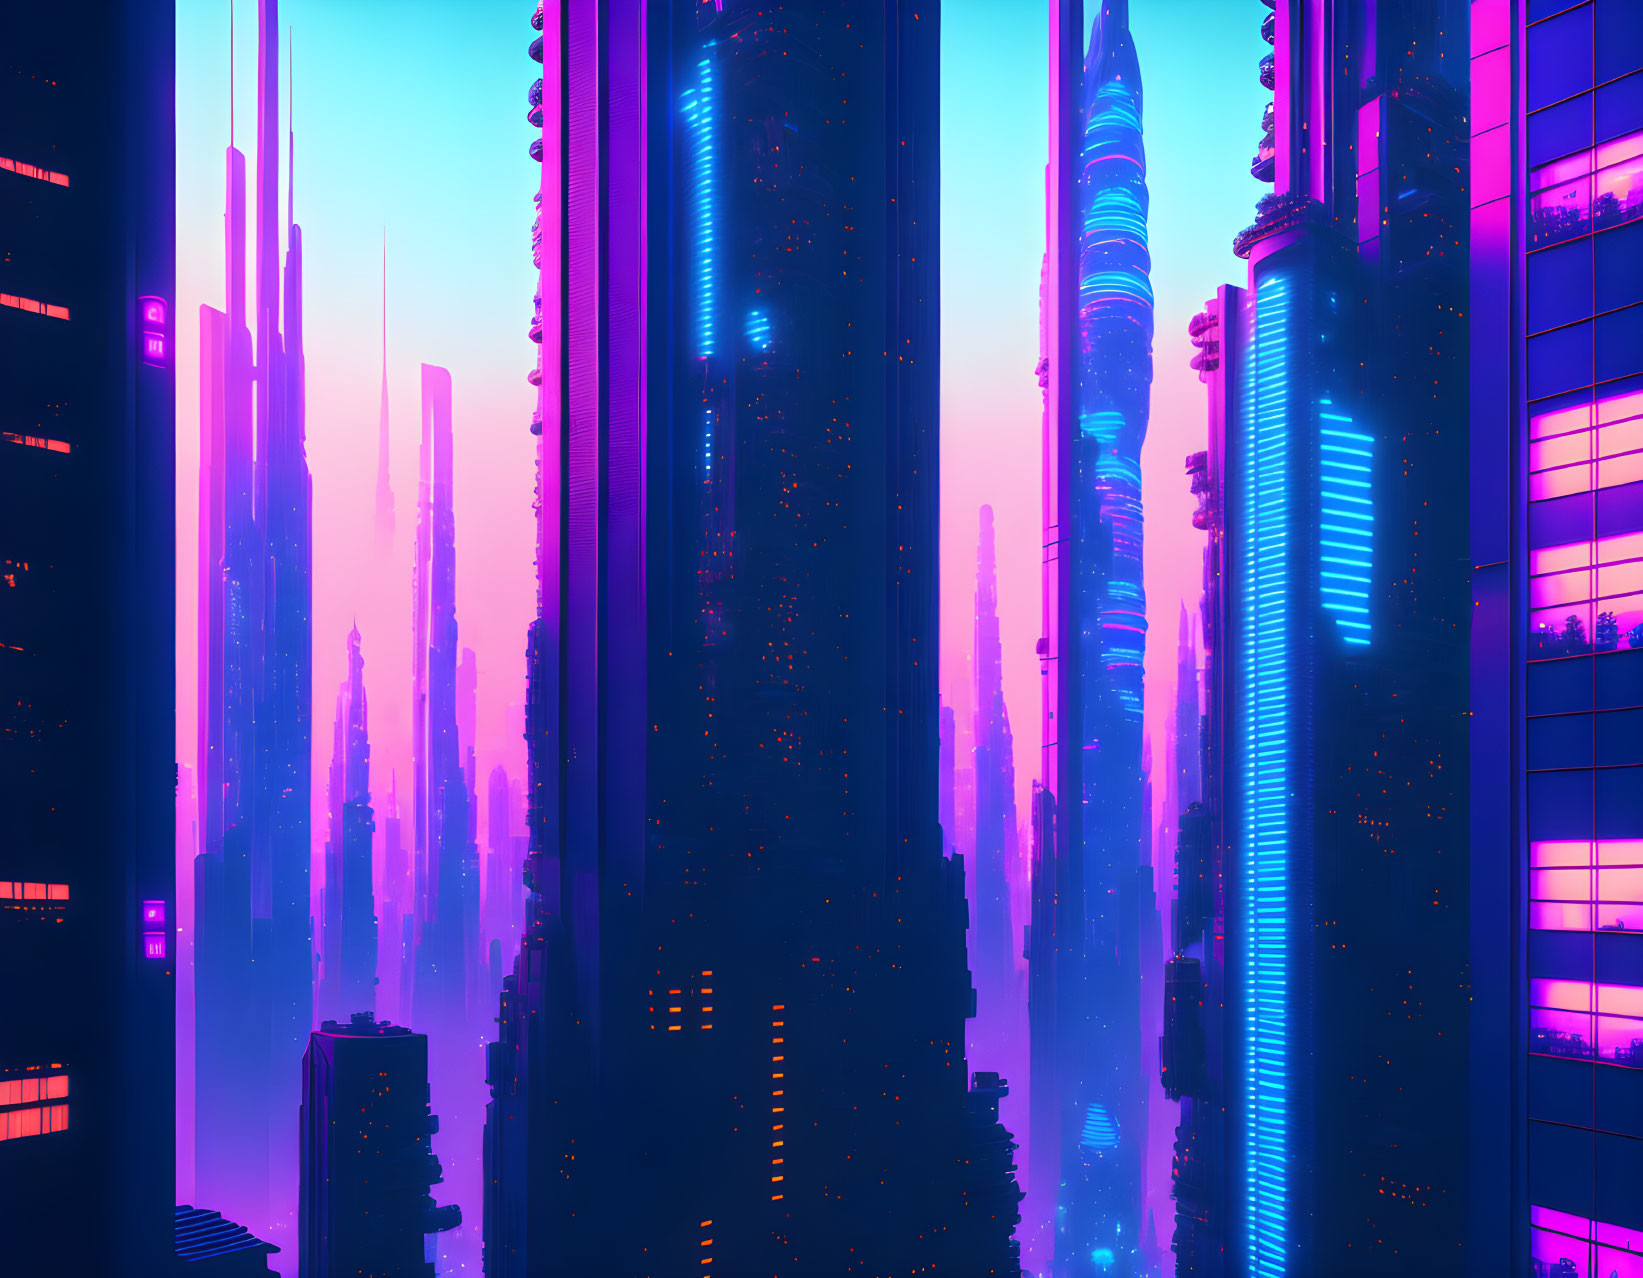 Neon-lit cyberpunk cityscape with towering skyscrapers at dusk